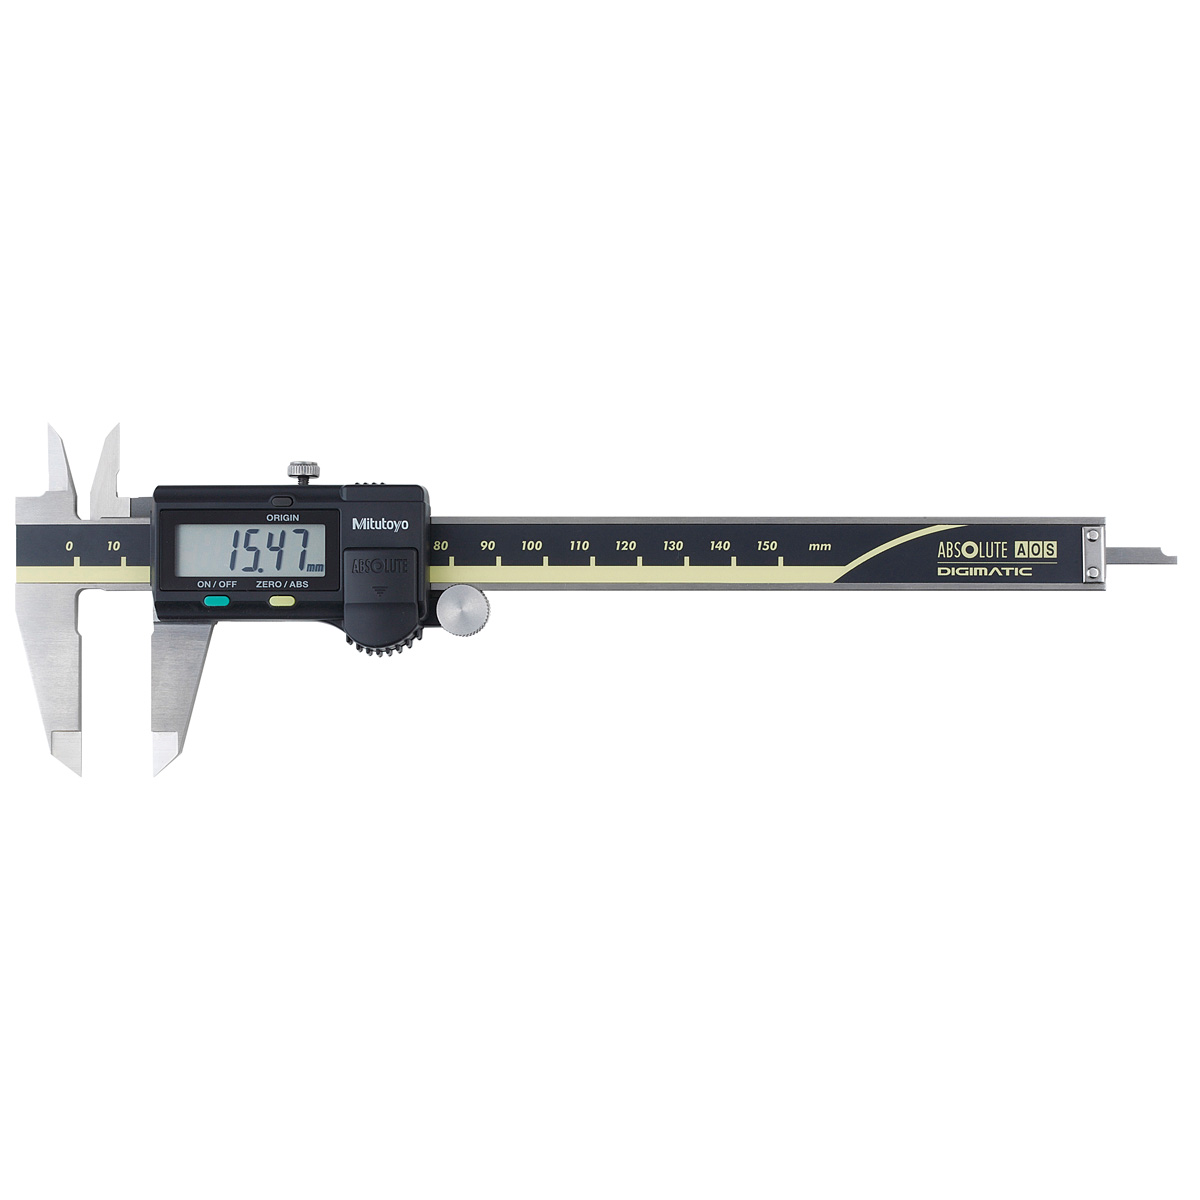 Picture of Mitutoyo 500-151-30 150 mm Digimatic AOS Absolute Caliper with Range SPC Output